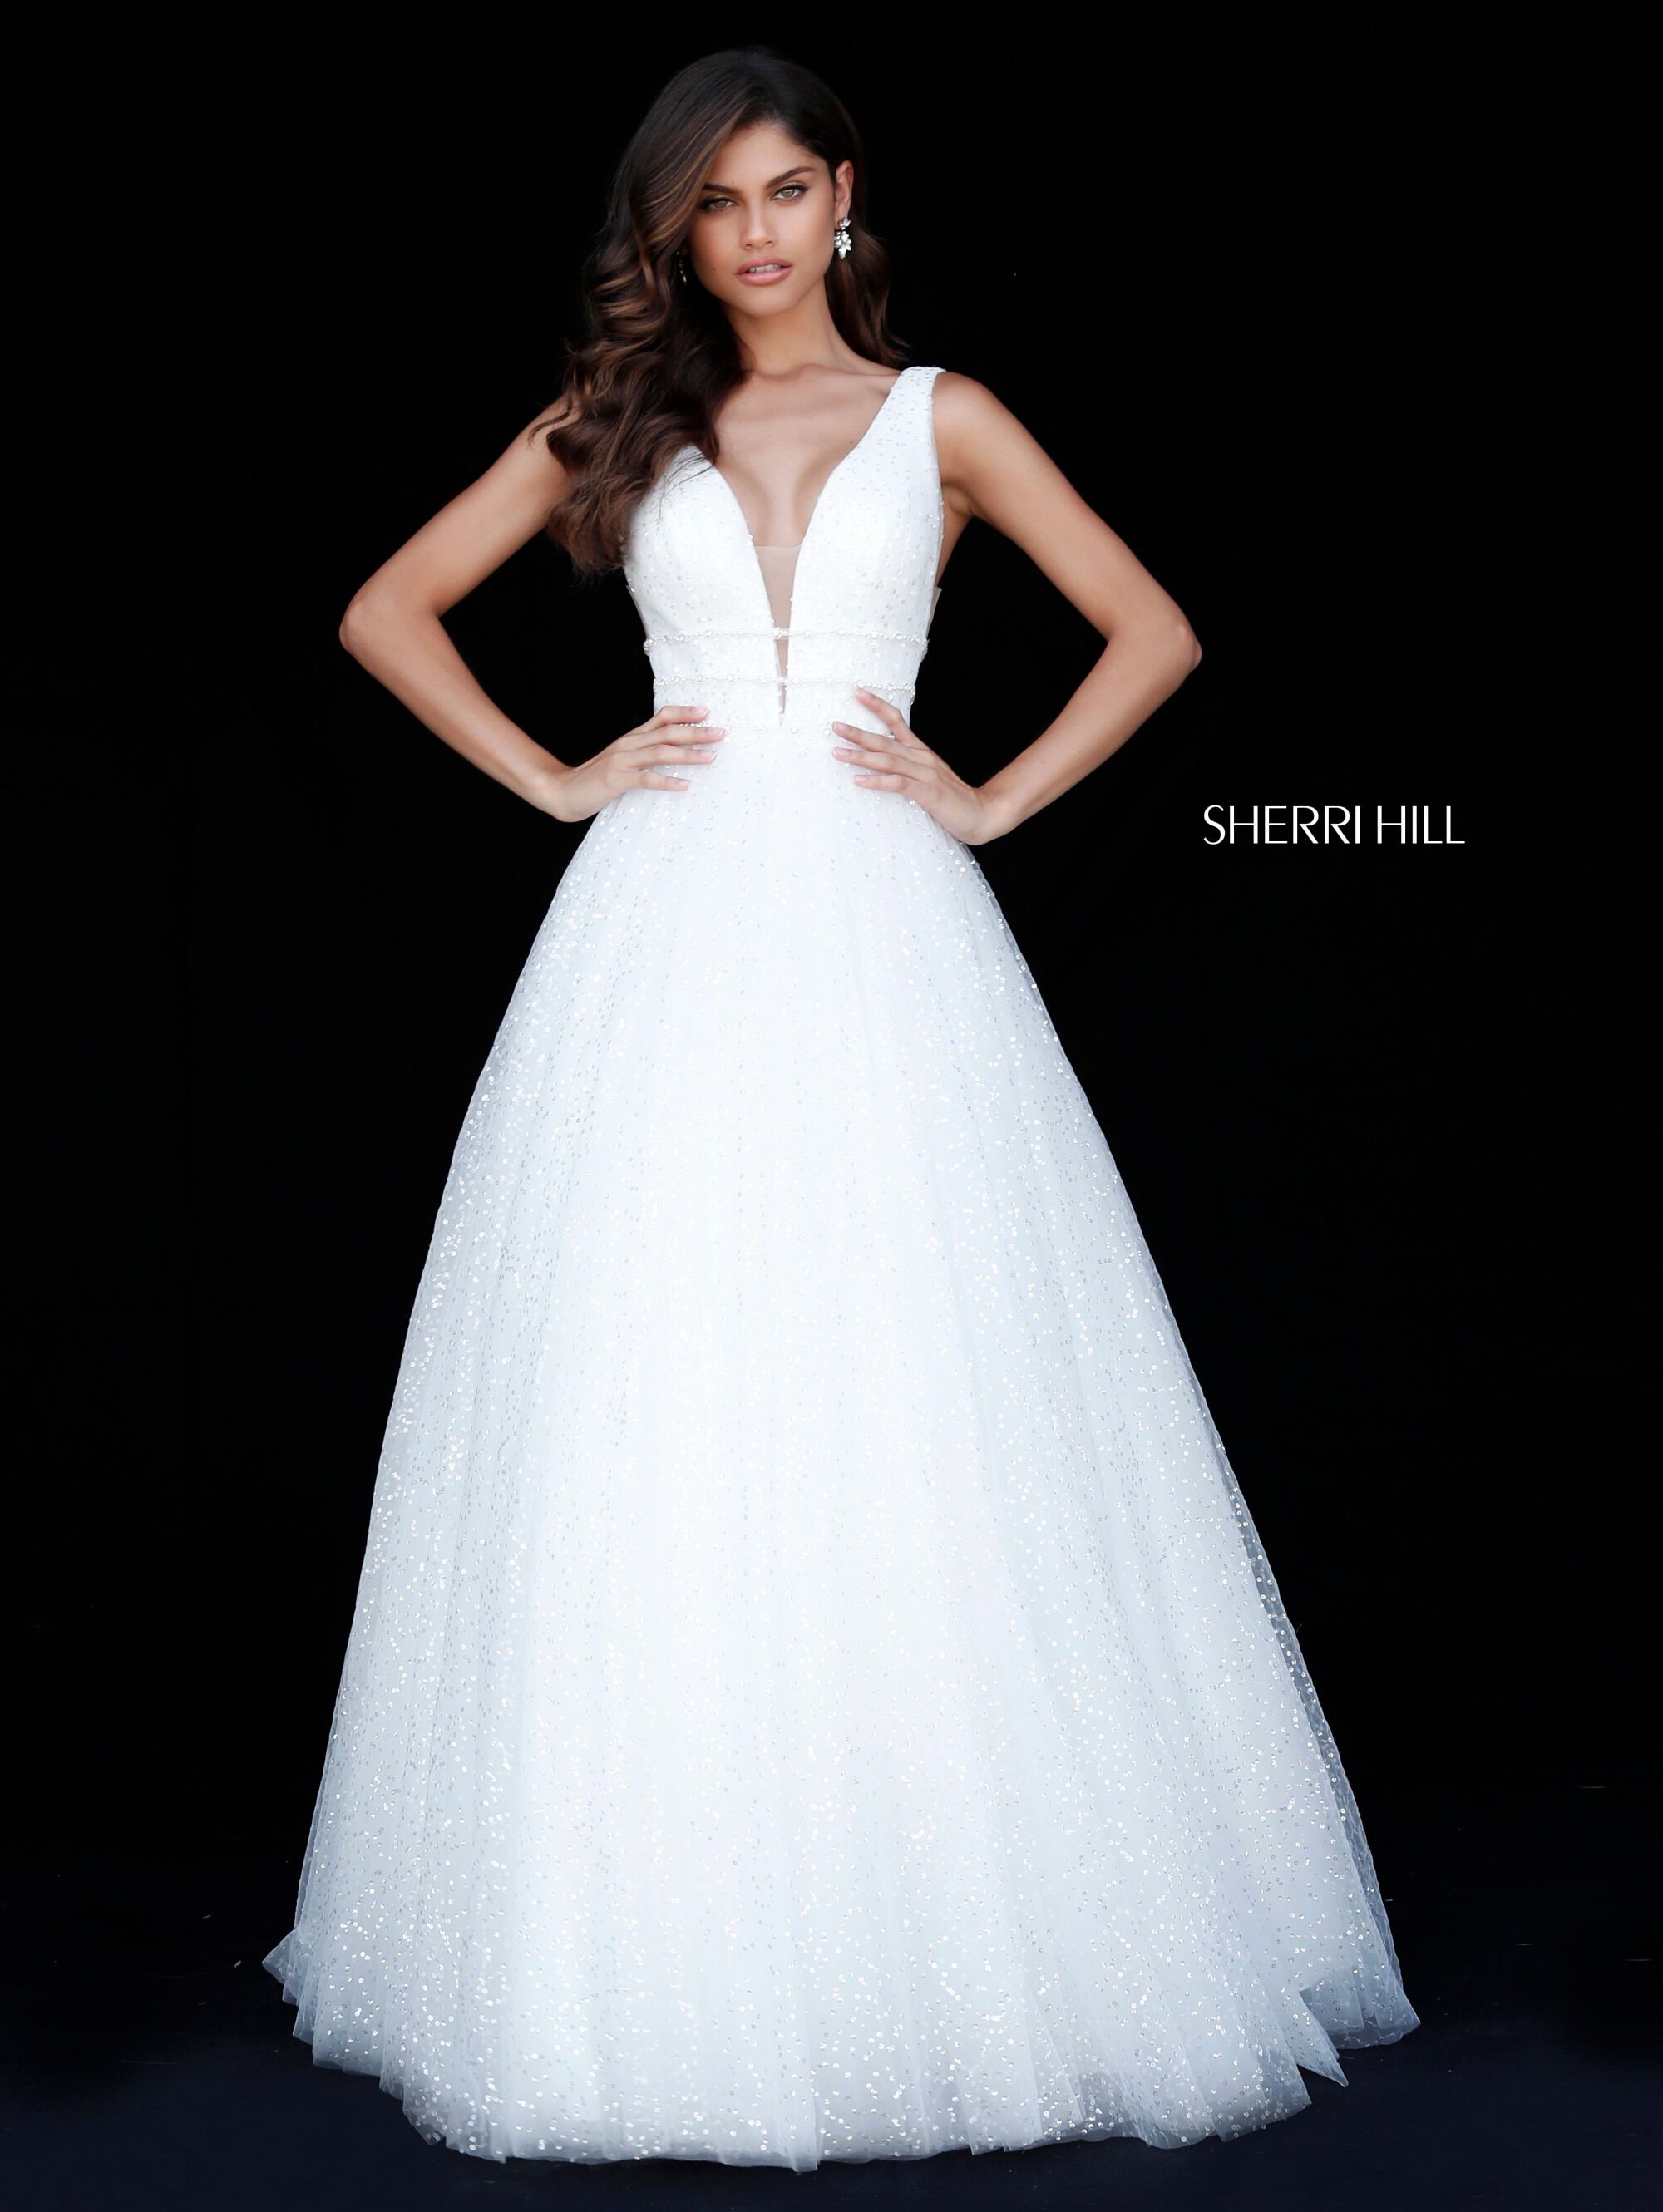 style № 51676 designed by SherriHill